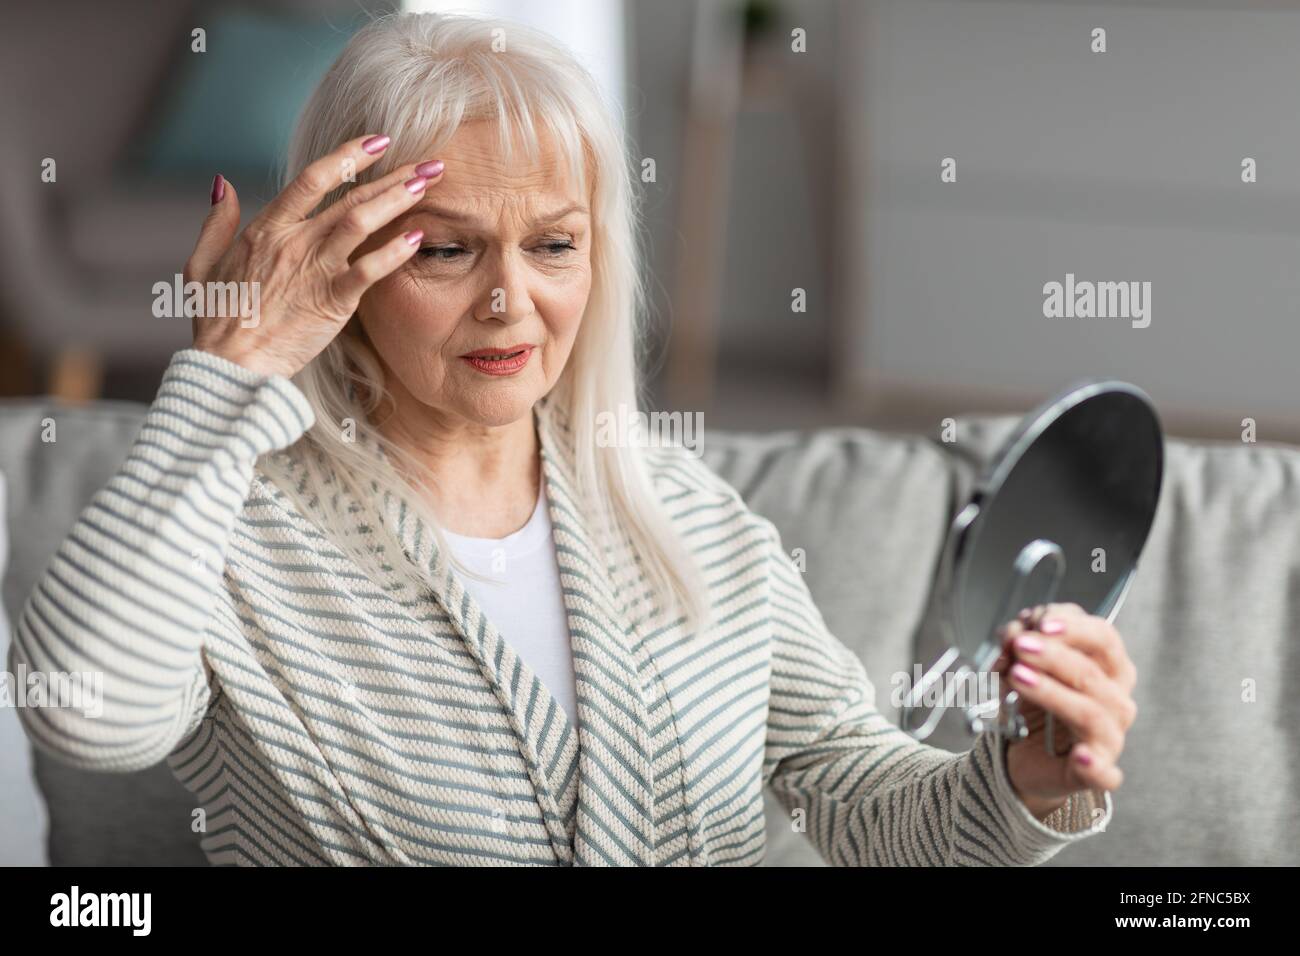 Adult woman checking her face in mirror, touching face Stock Photo